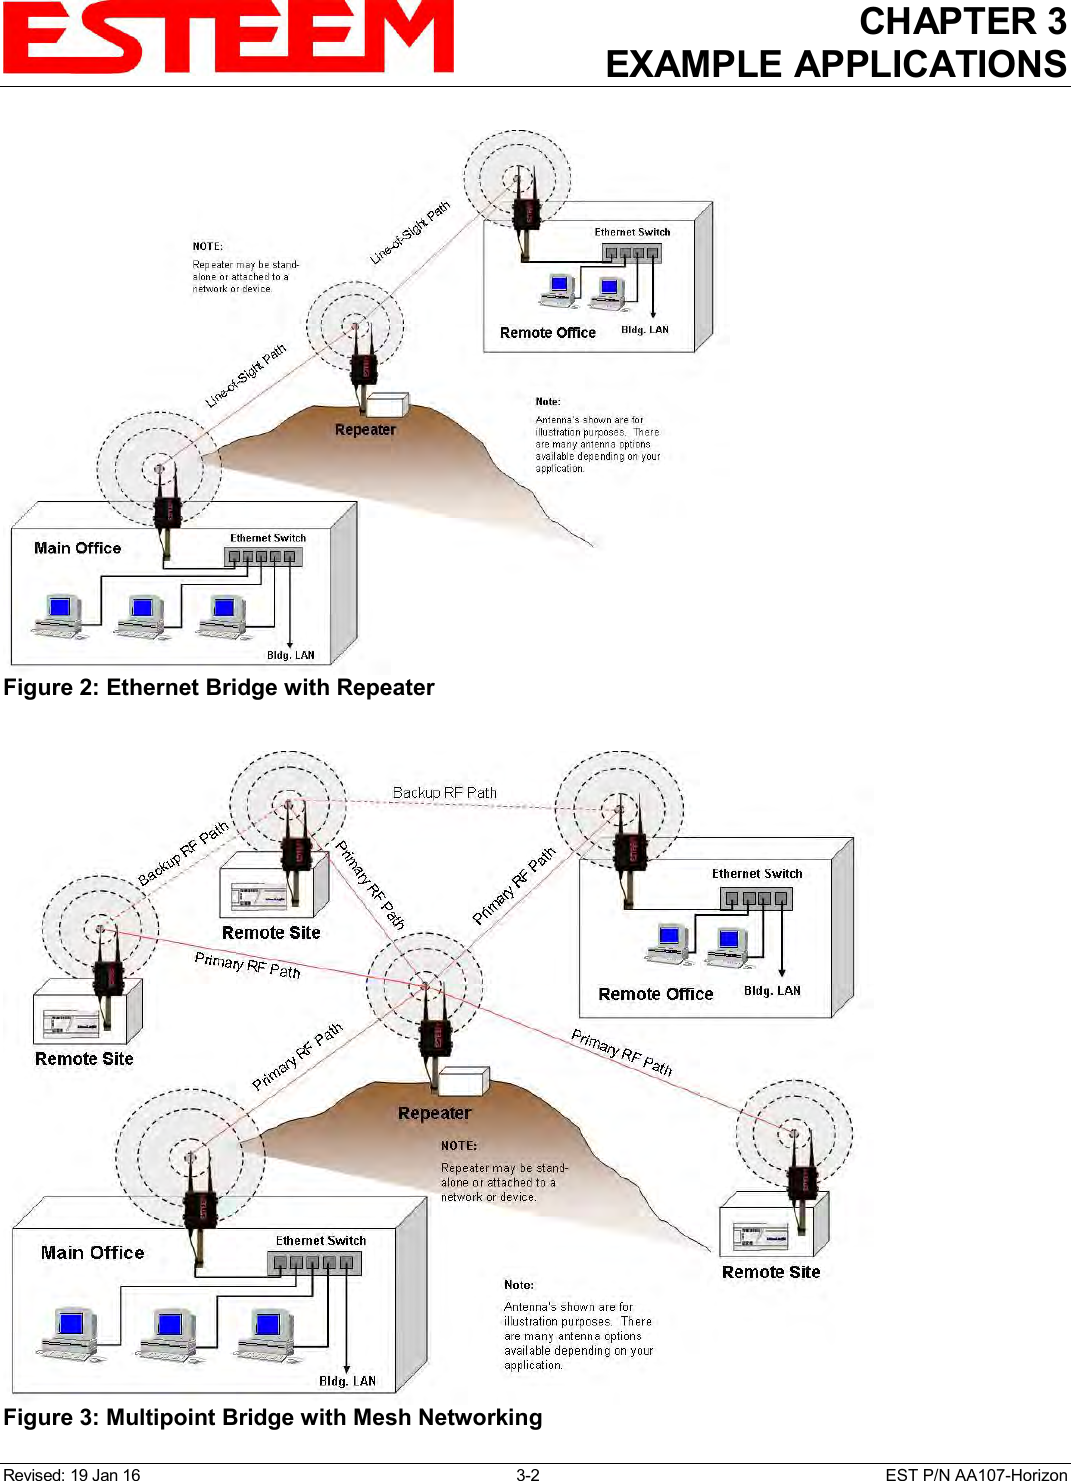 CHAPTER 3 EXAMPLE APPLICATIONS  Revised: 19 Jan 16  3-2  EST P/N AA107-Horizon  Figure 3: Multipoint Bridge with Mesh Networking   Figure 2: Ethernet Bridge with Repeater  